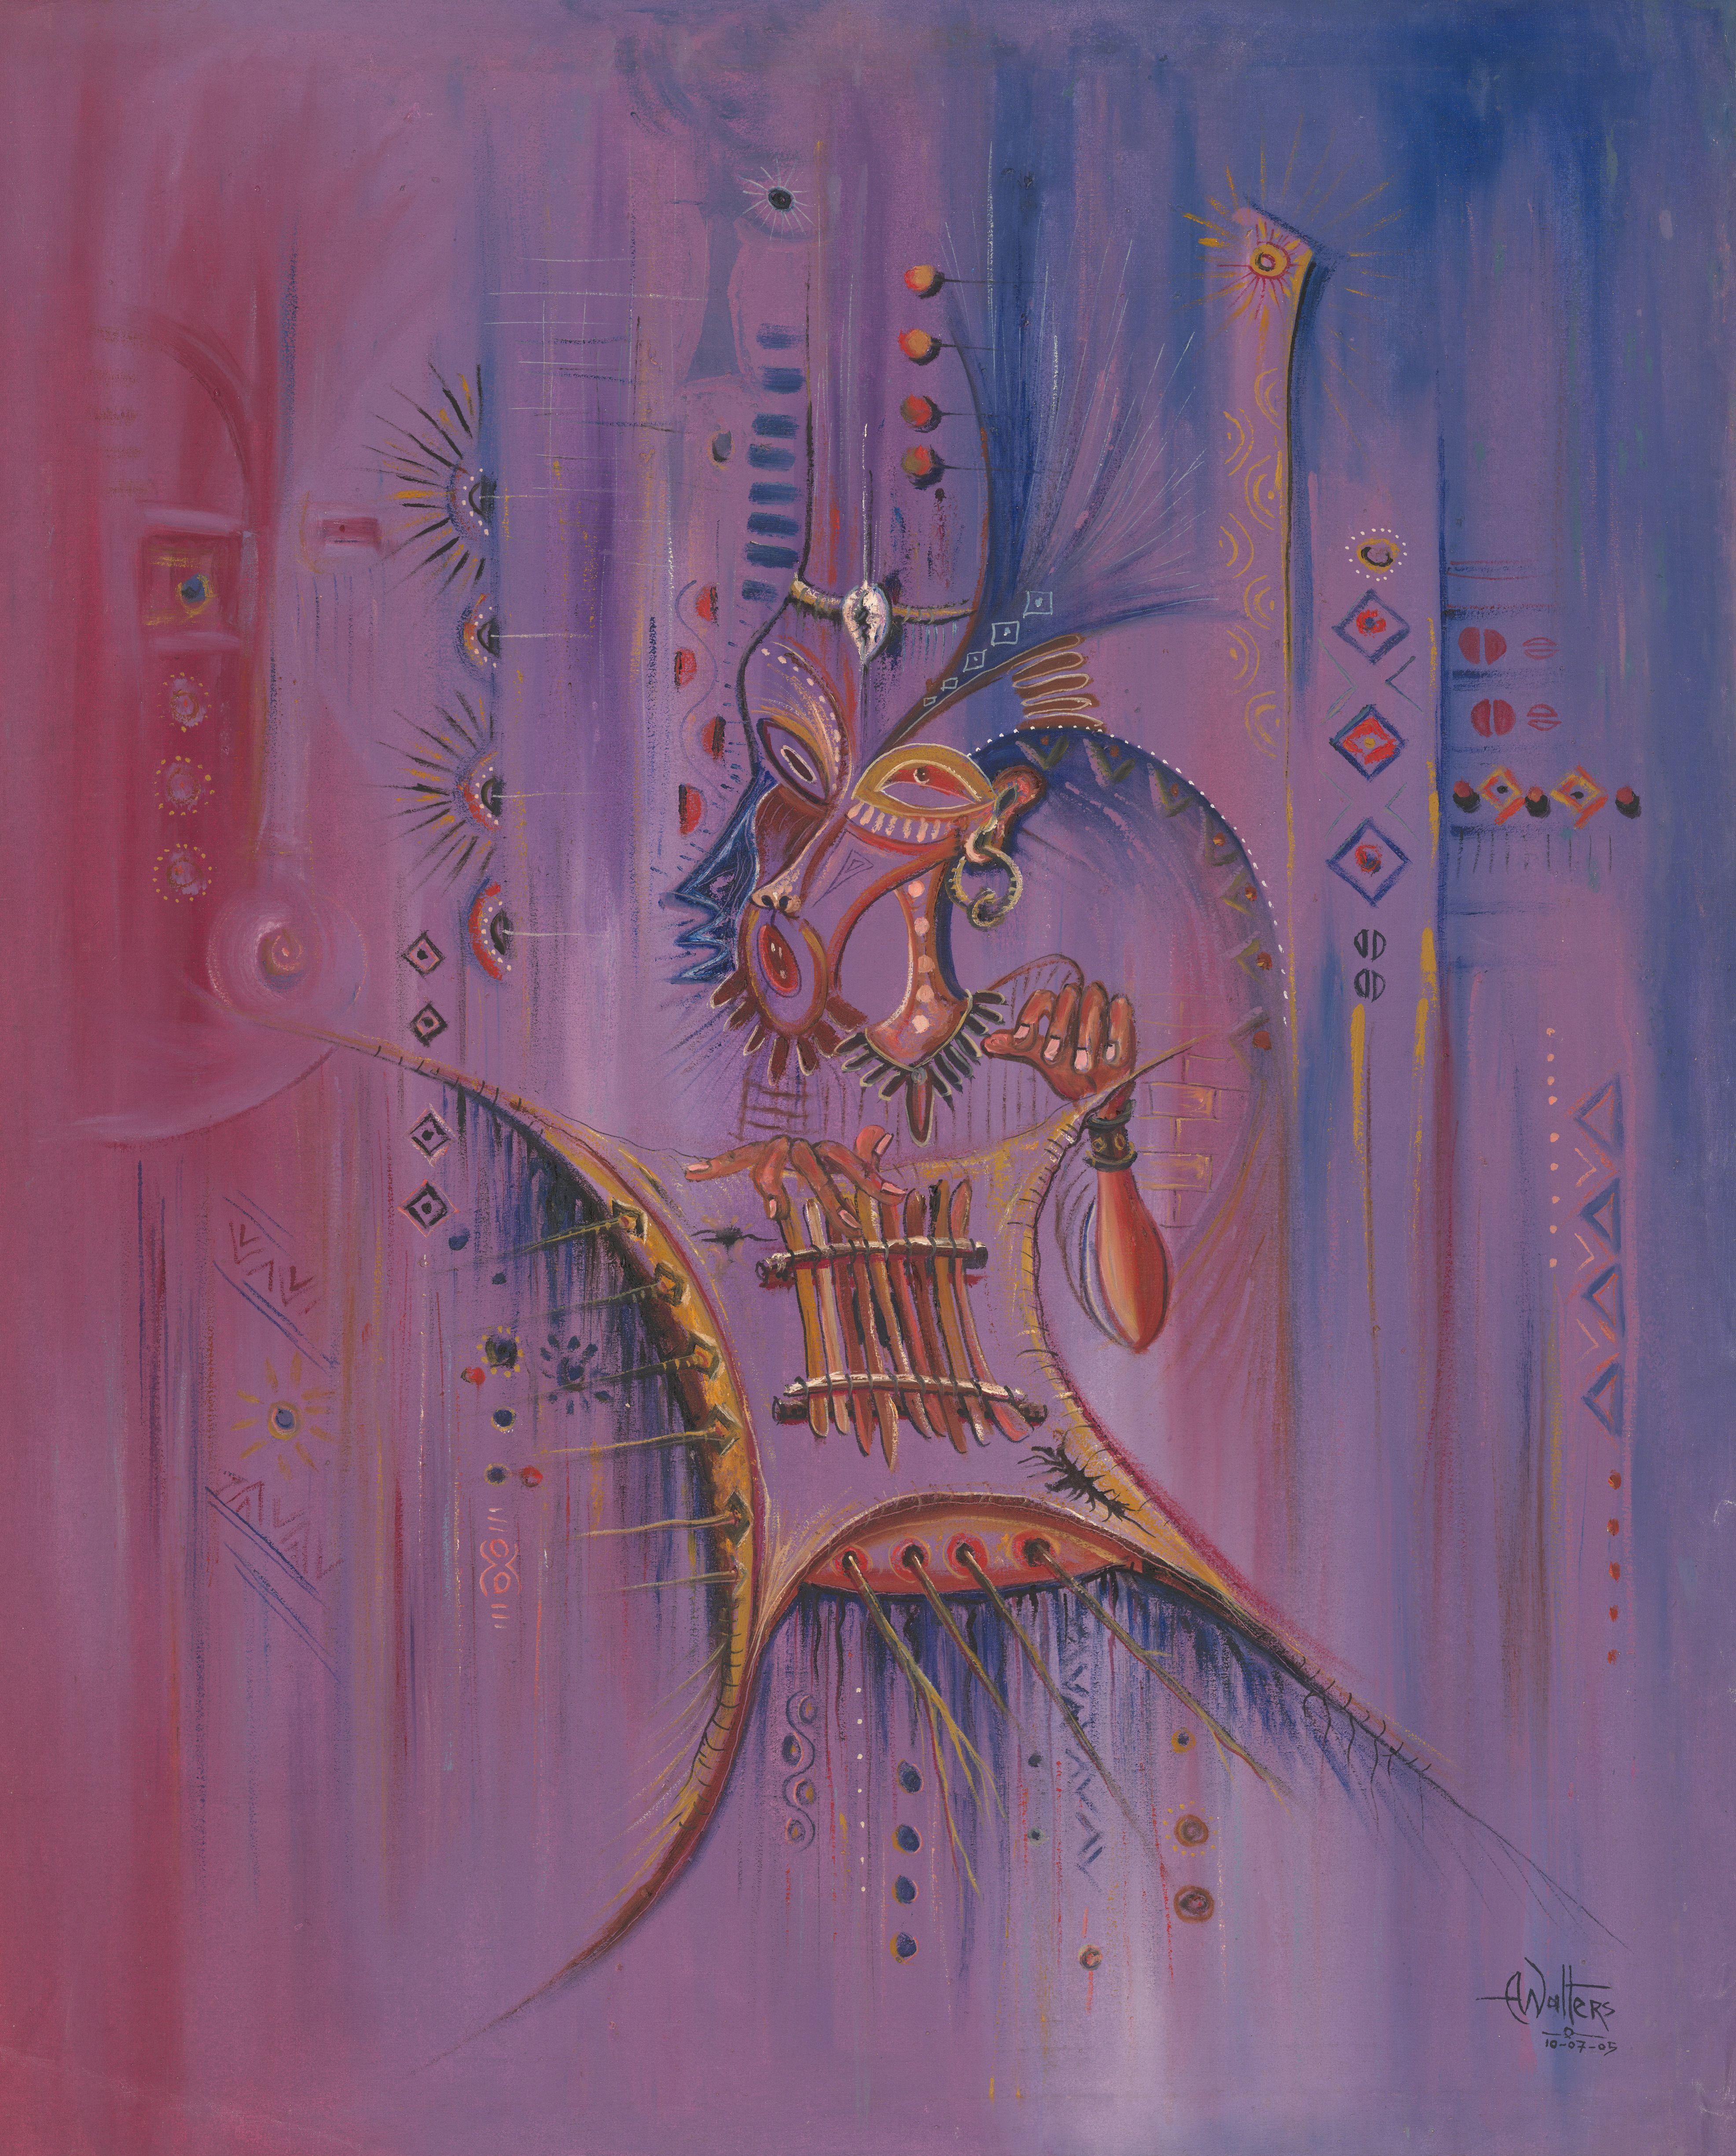 Here is an original oil painting of an African musician playing the sanza, in hues of purple and violet.    "The sanza has traditionally accompanied African praise songs honoring ancestors and revered chiefs for centuries. As a major instrument of